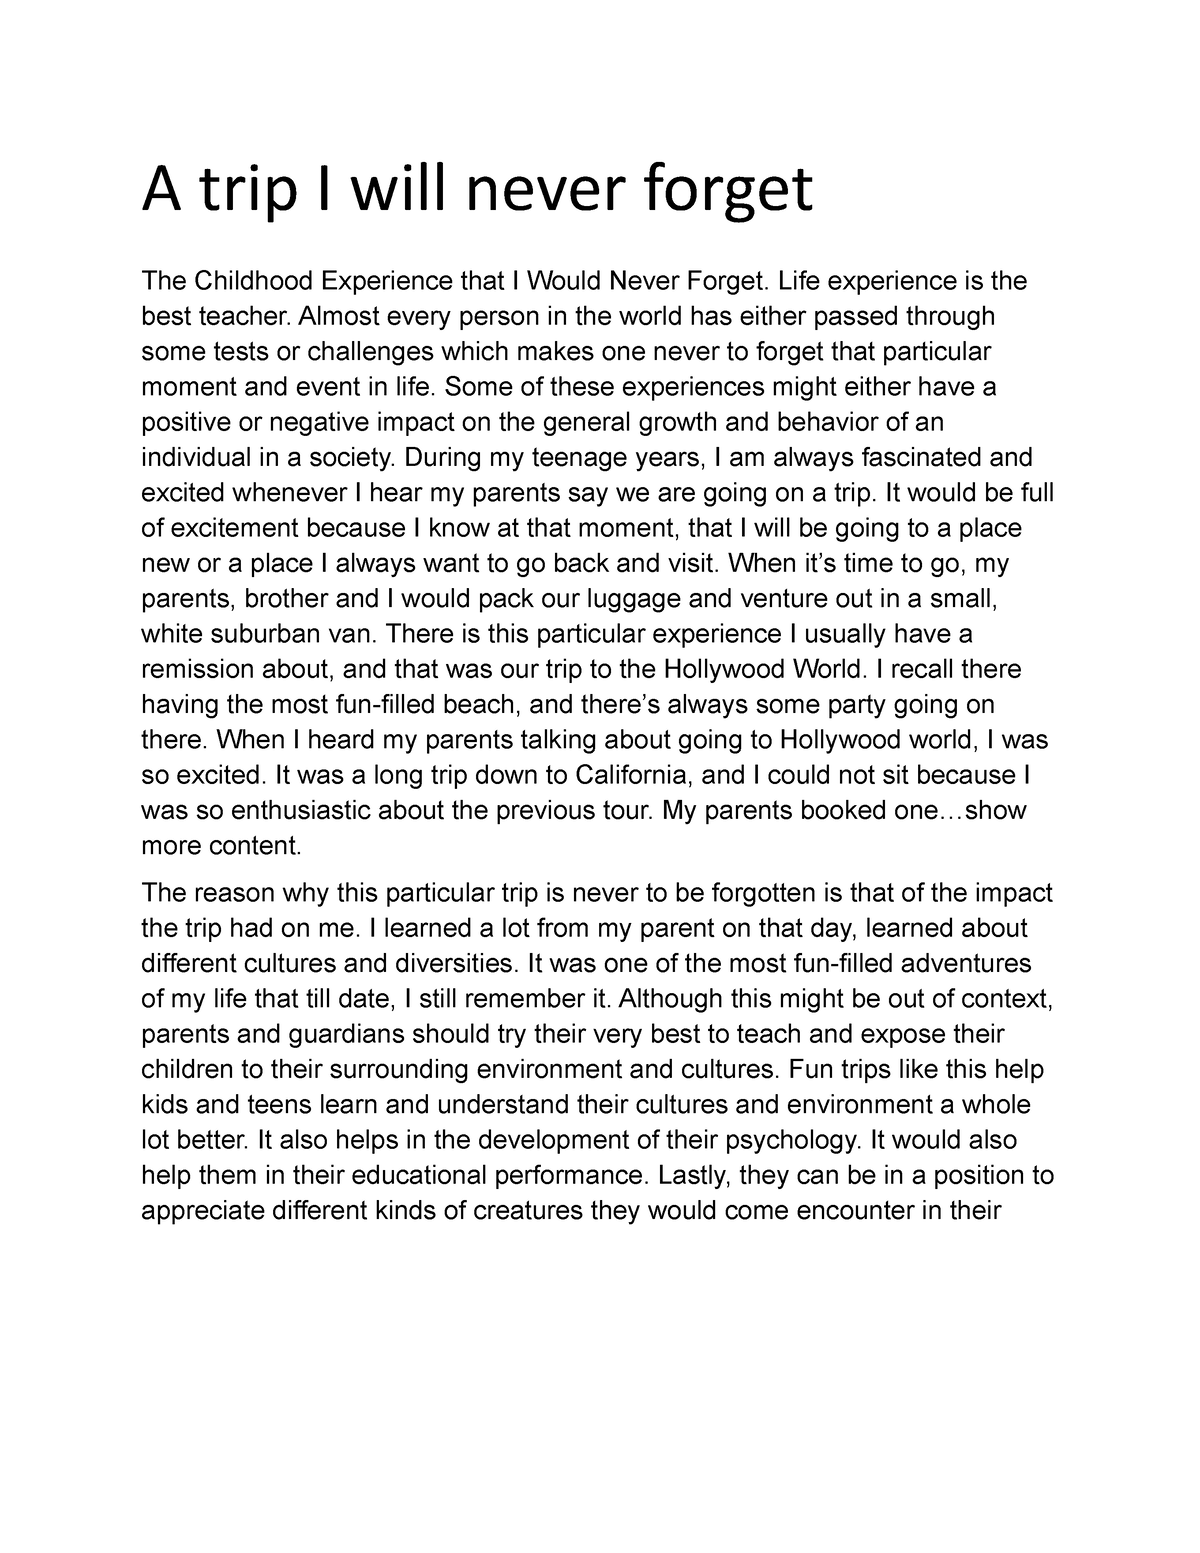 write a descriptive essay on the day i will never forget